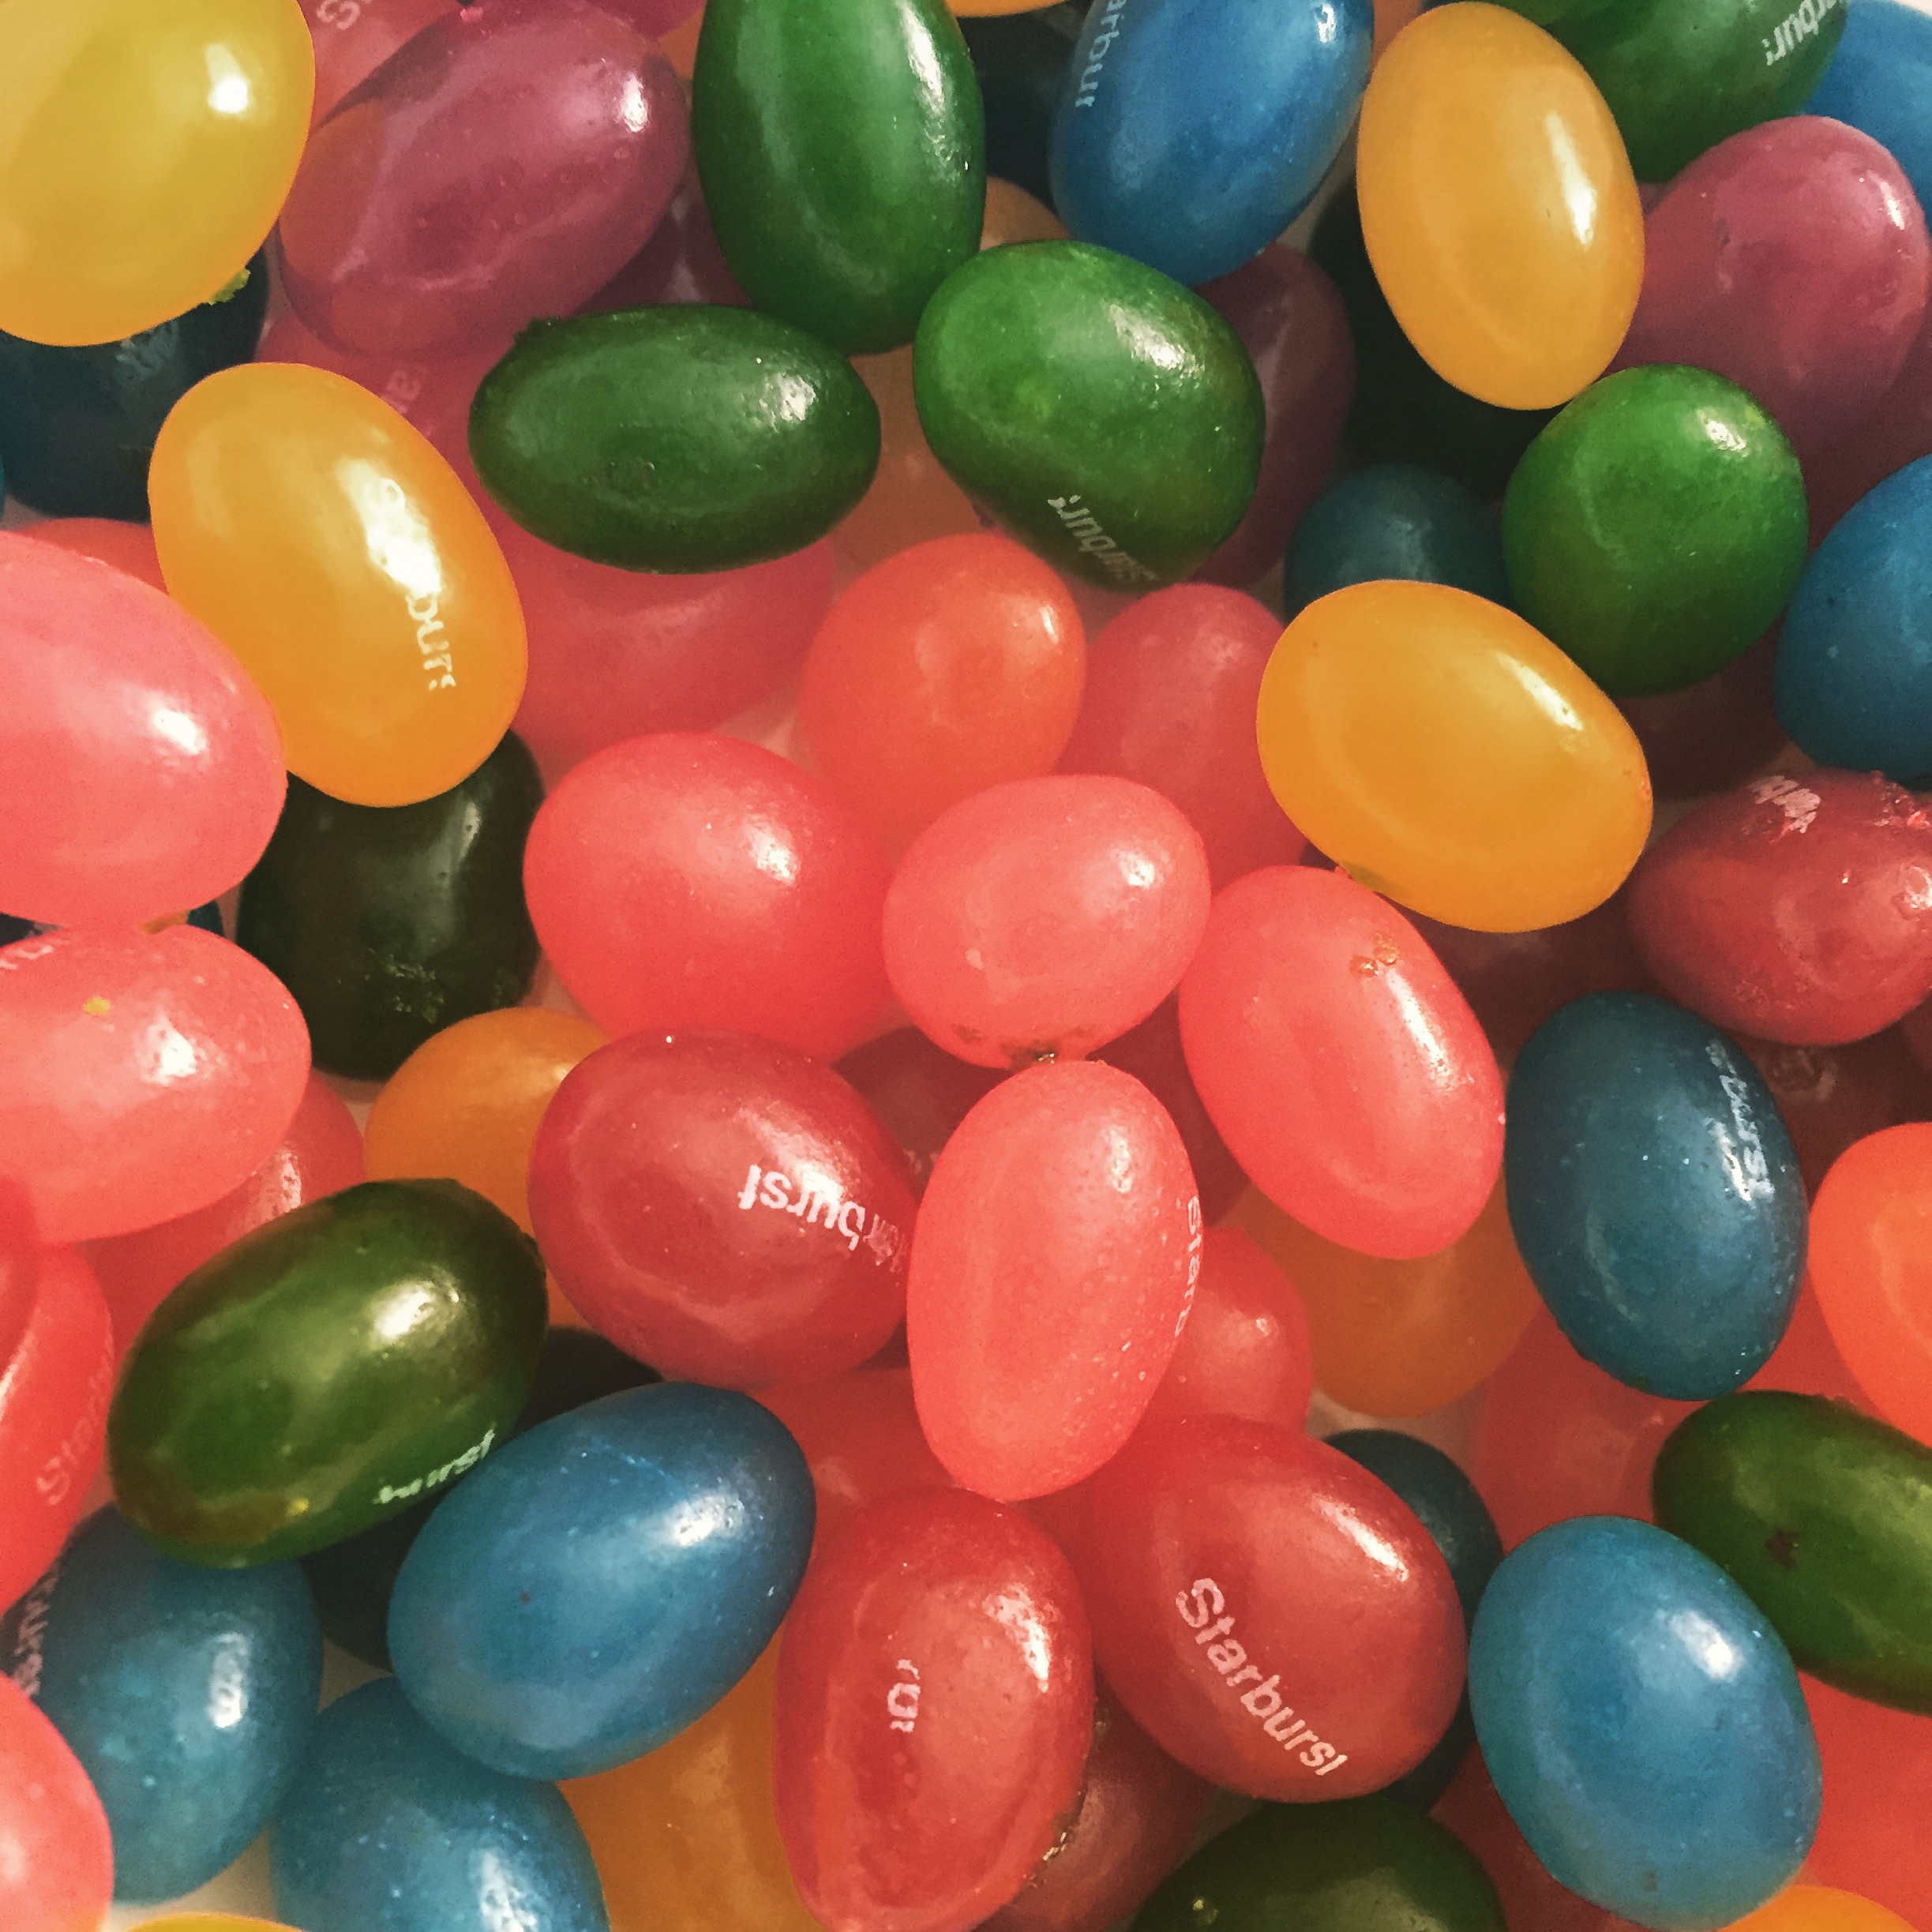 Starburst Sour Jelly Beans [Review] | ZOMG! Candy